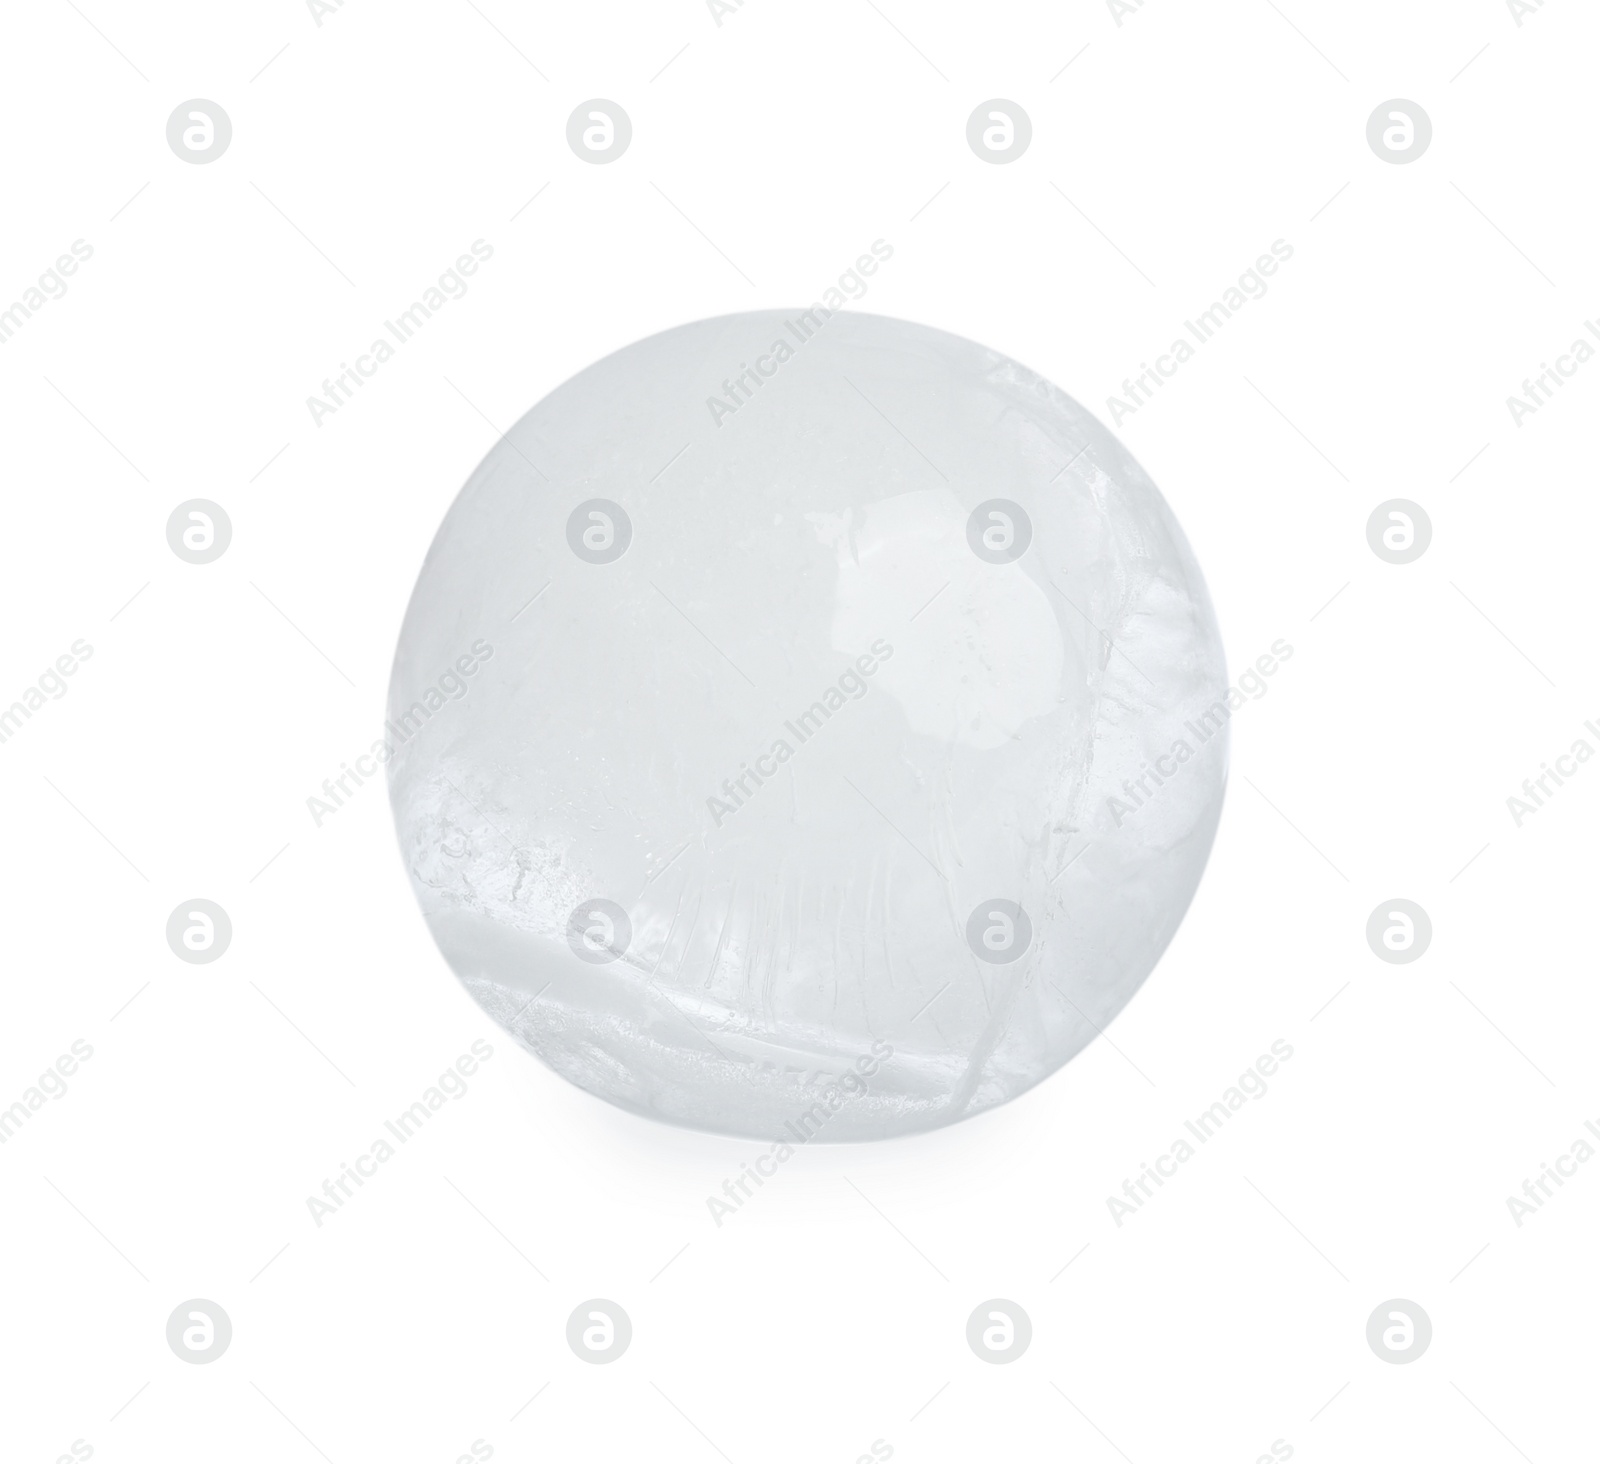 Photo of One frozen ice ball isolated on white